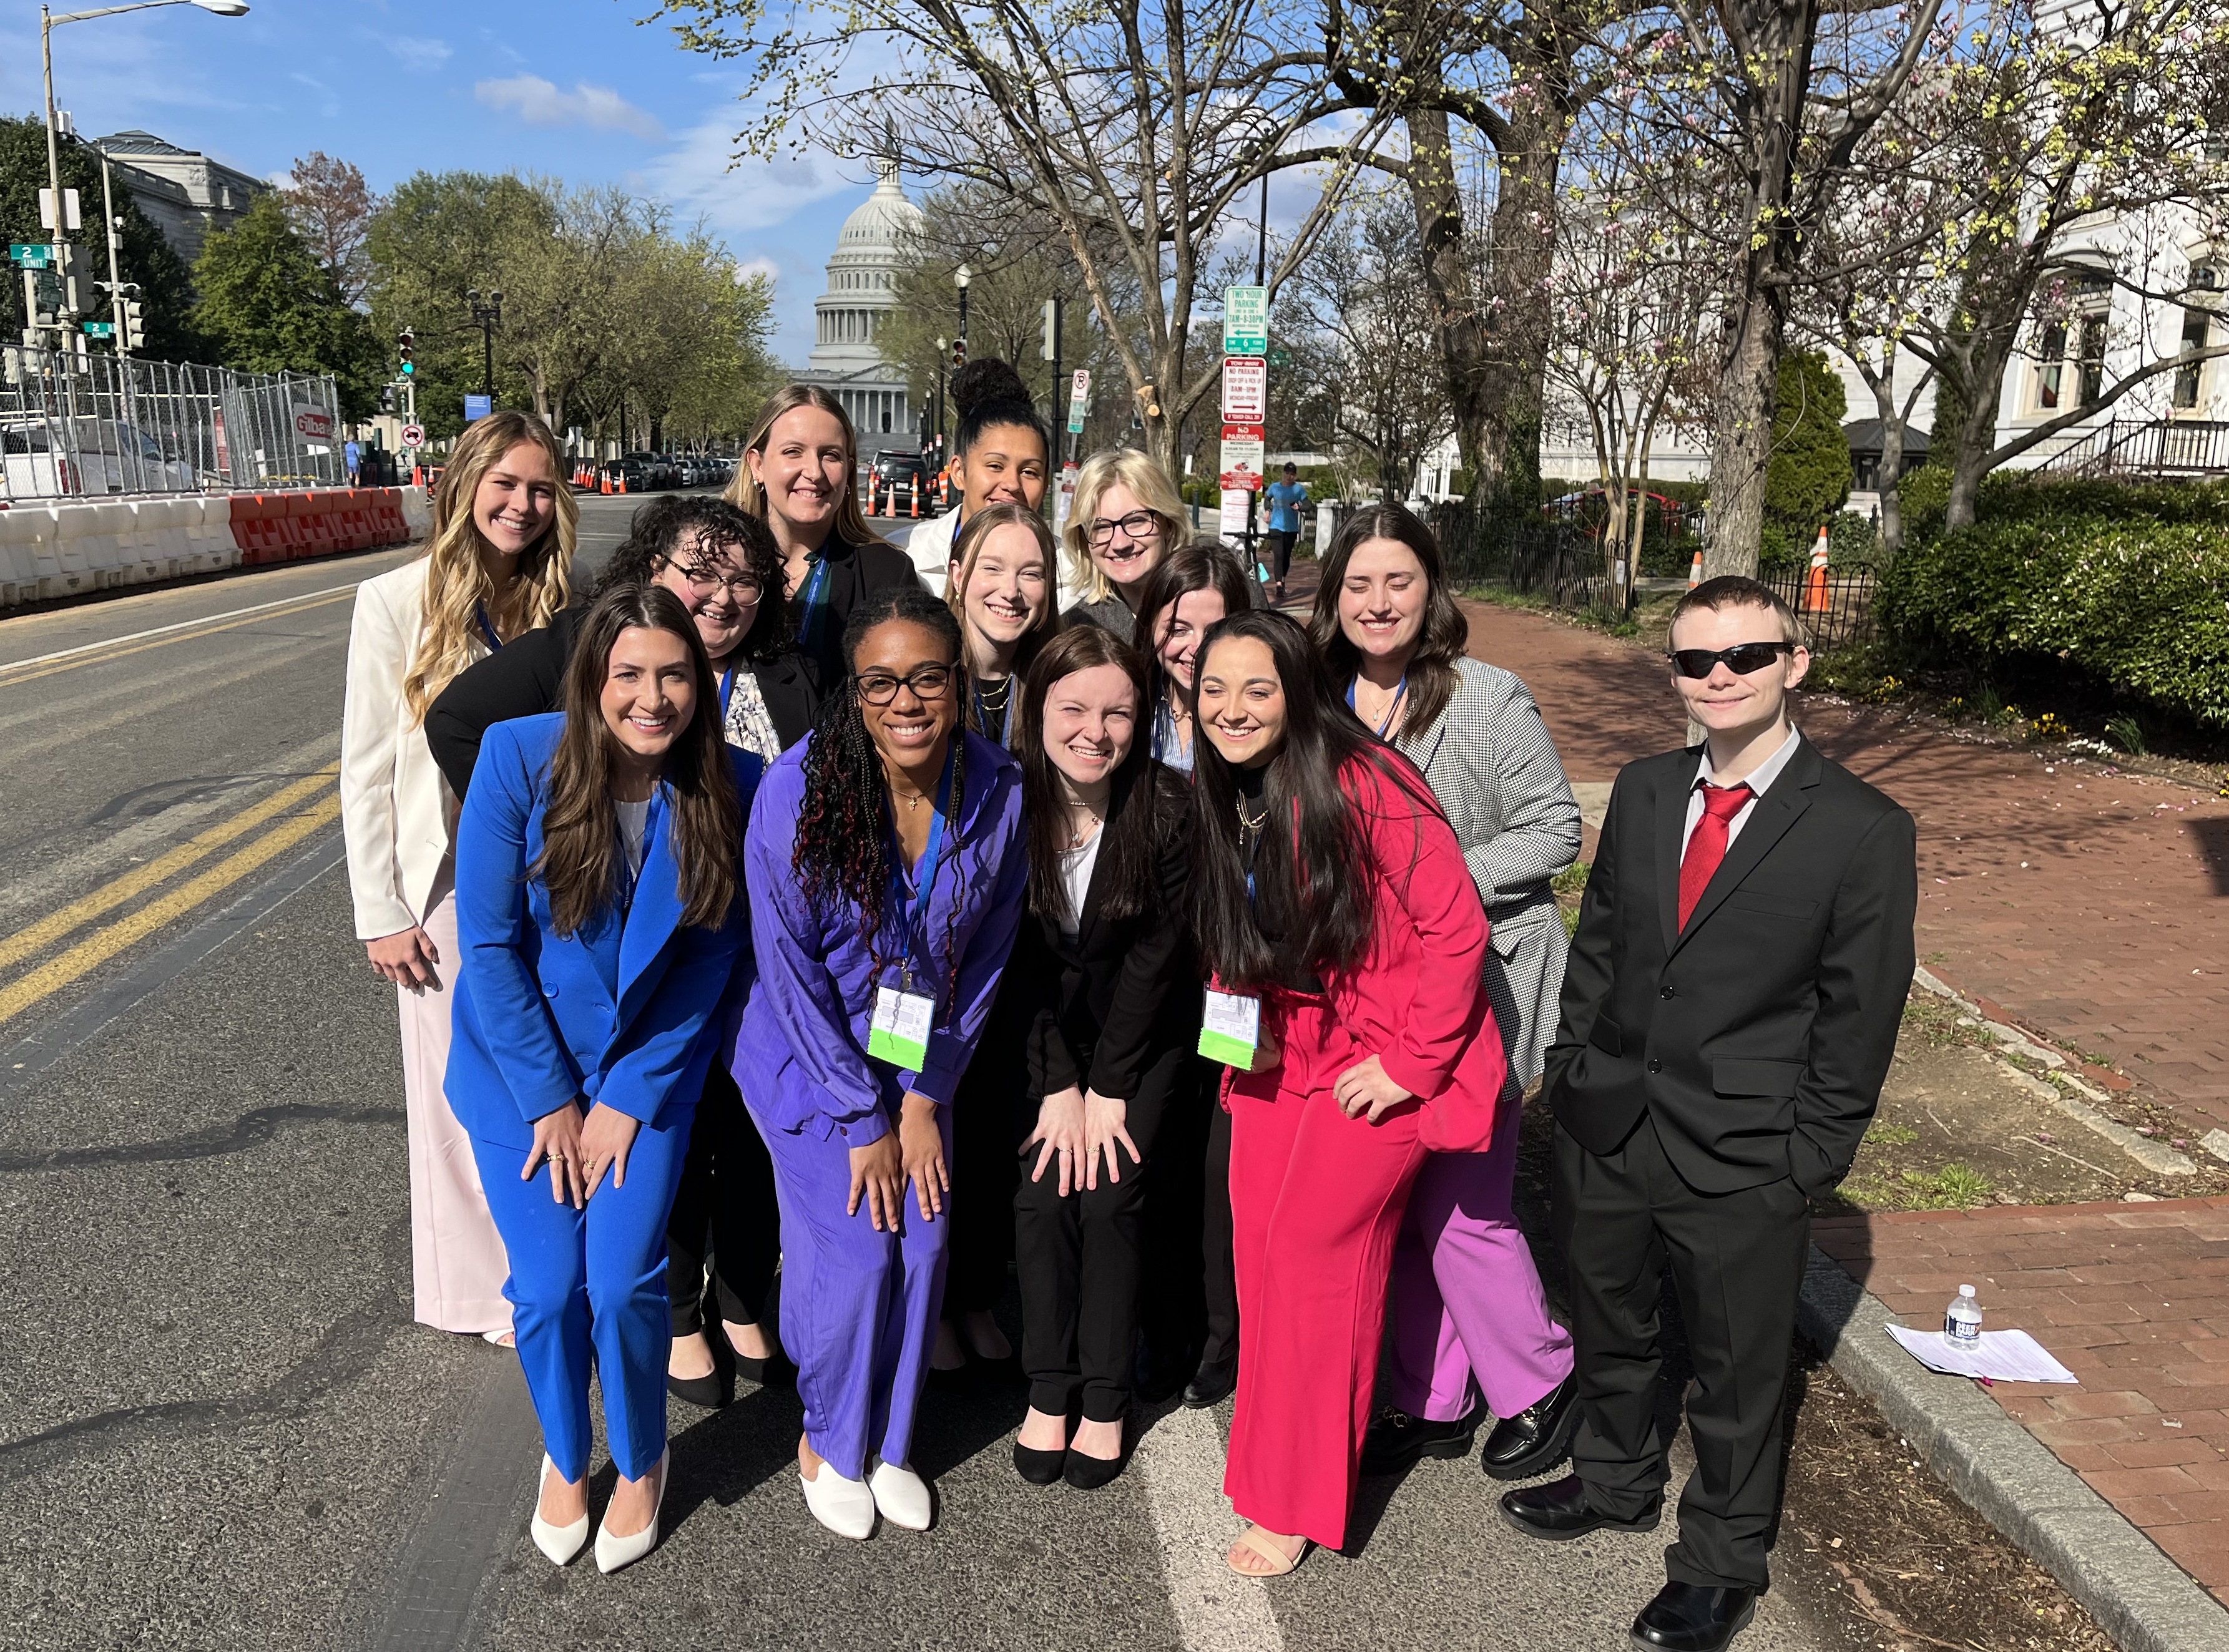 Mount Union students attend a lobby trip in DC